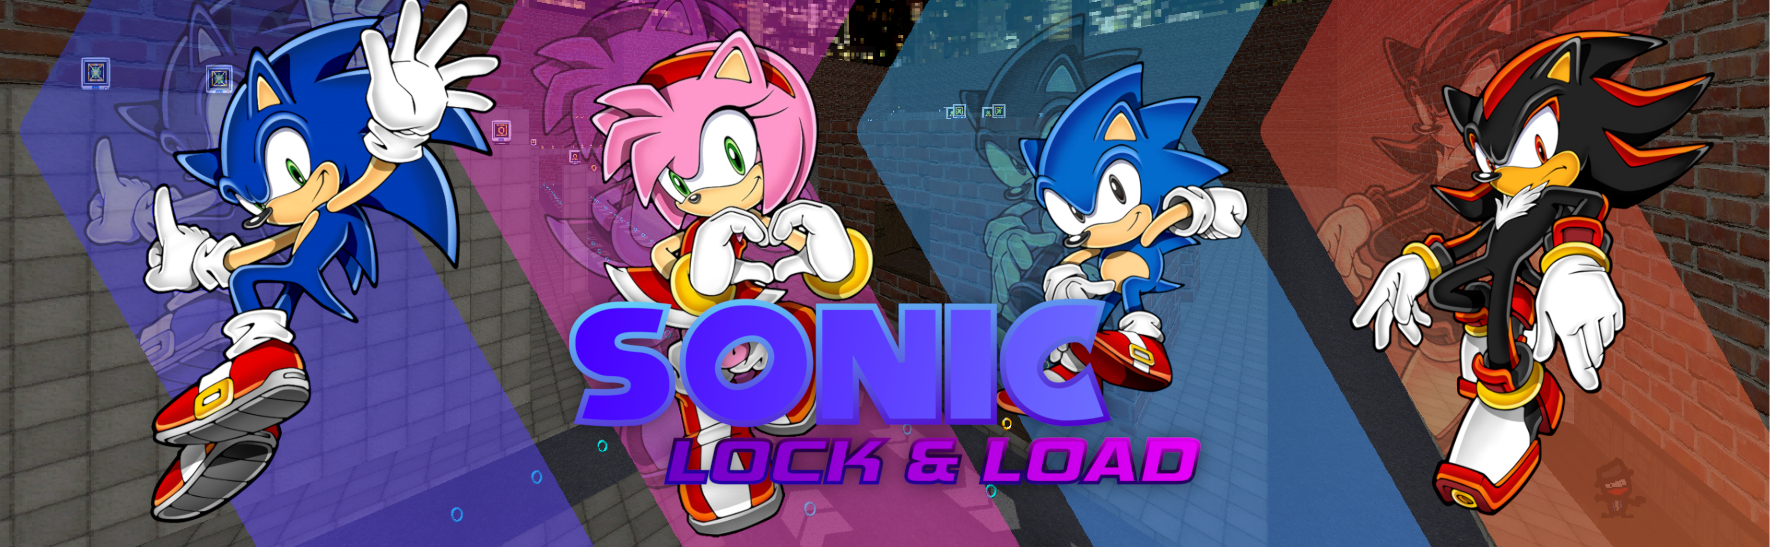 sonic-ll-banner.png